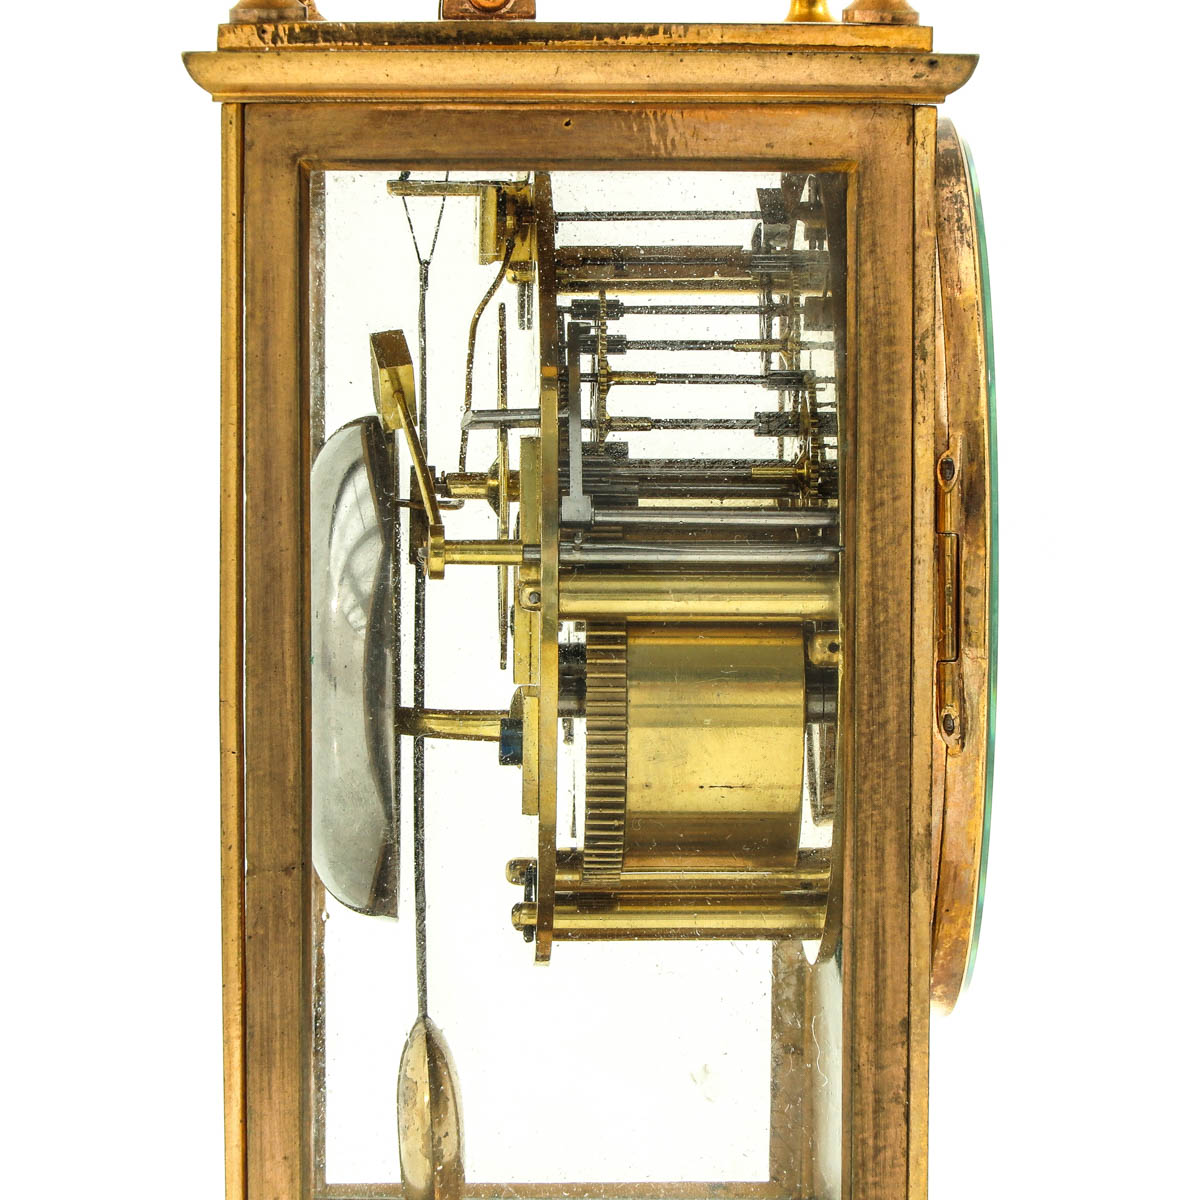 A French Carriage Clock - Image 8 of 9